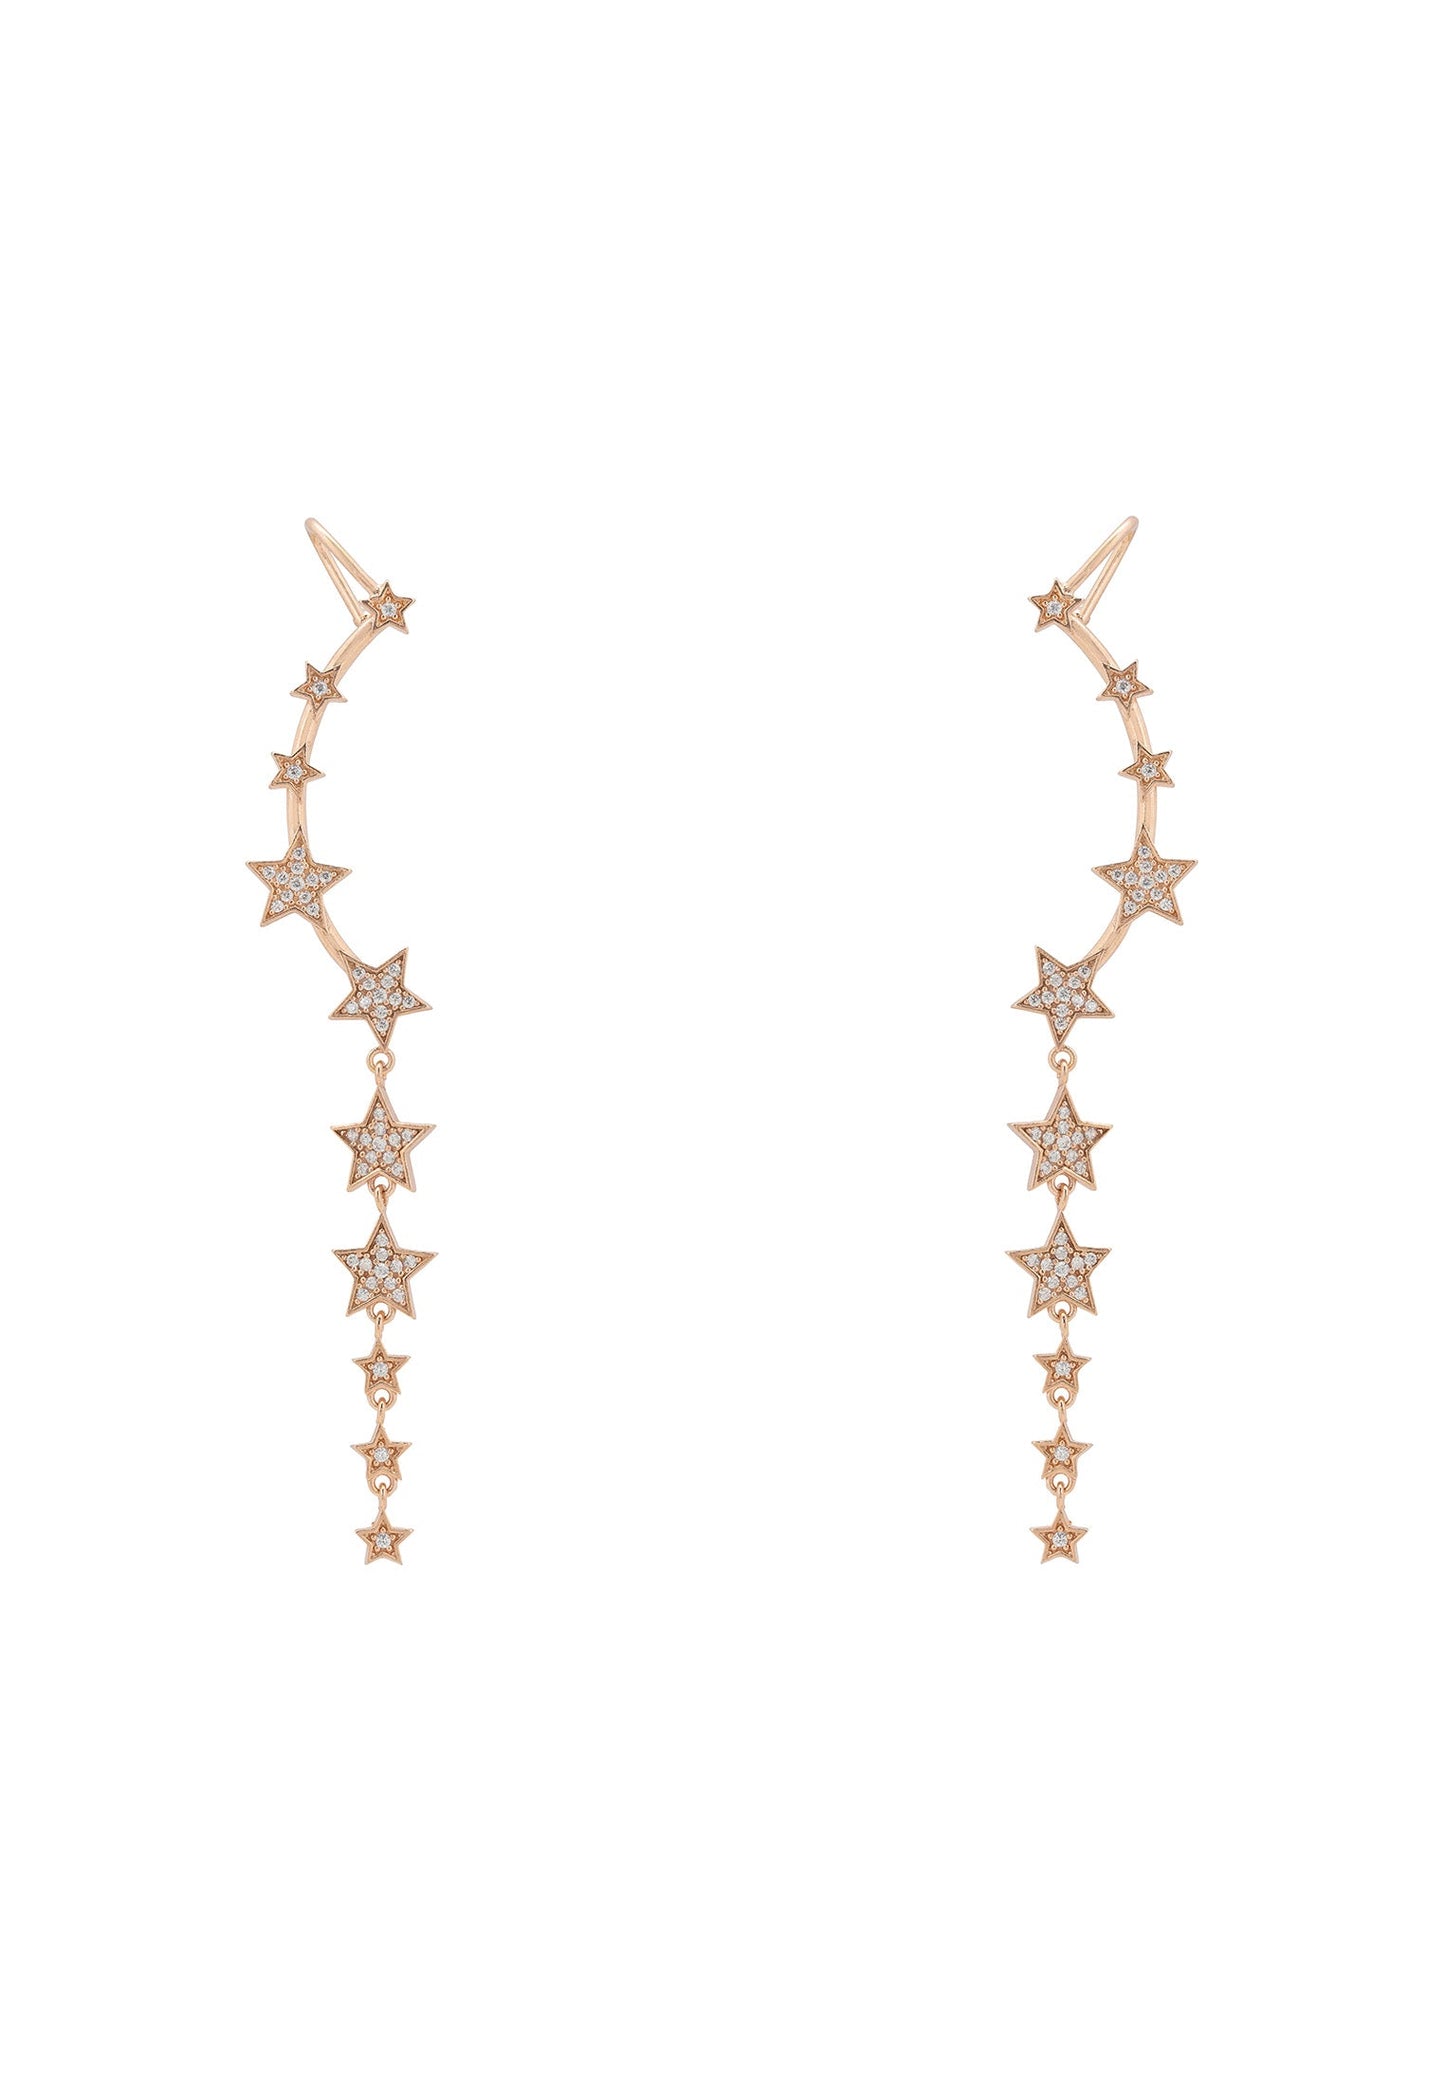 Graduated Star Ear Climbers With Drop Rosegold